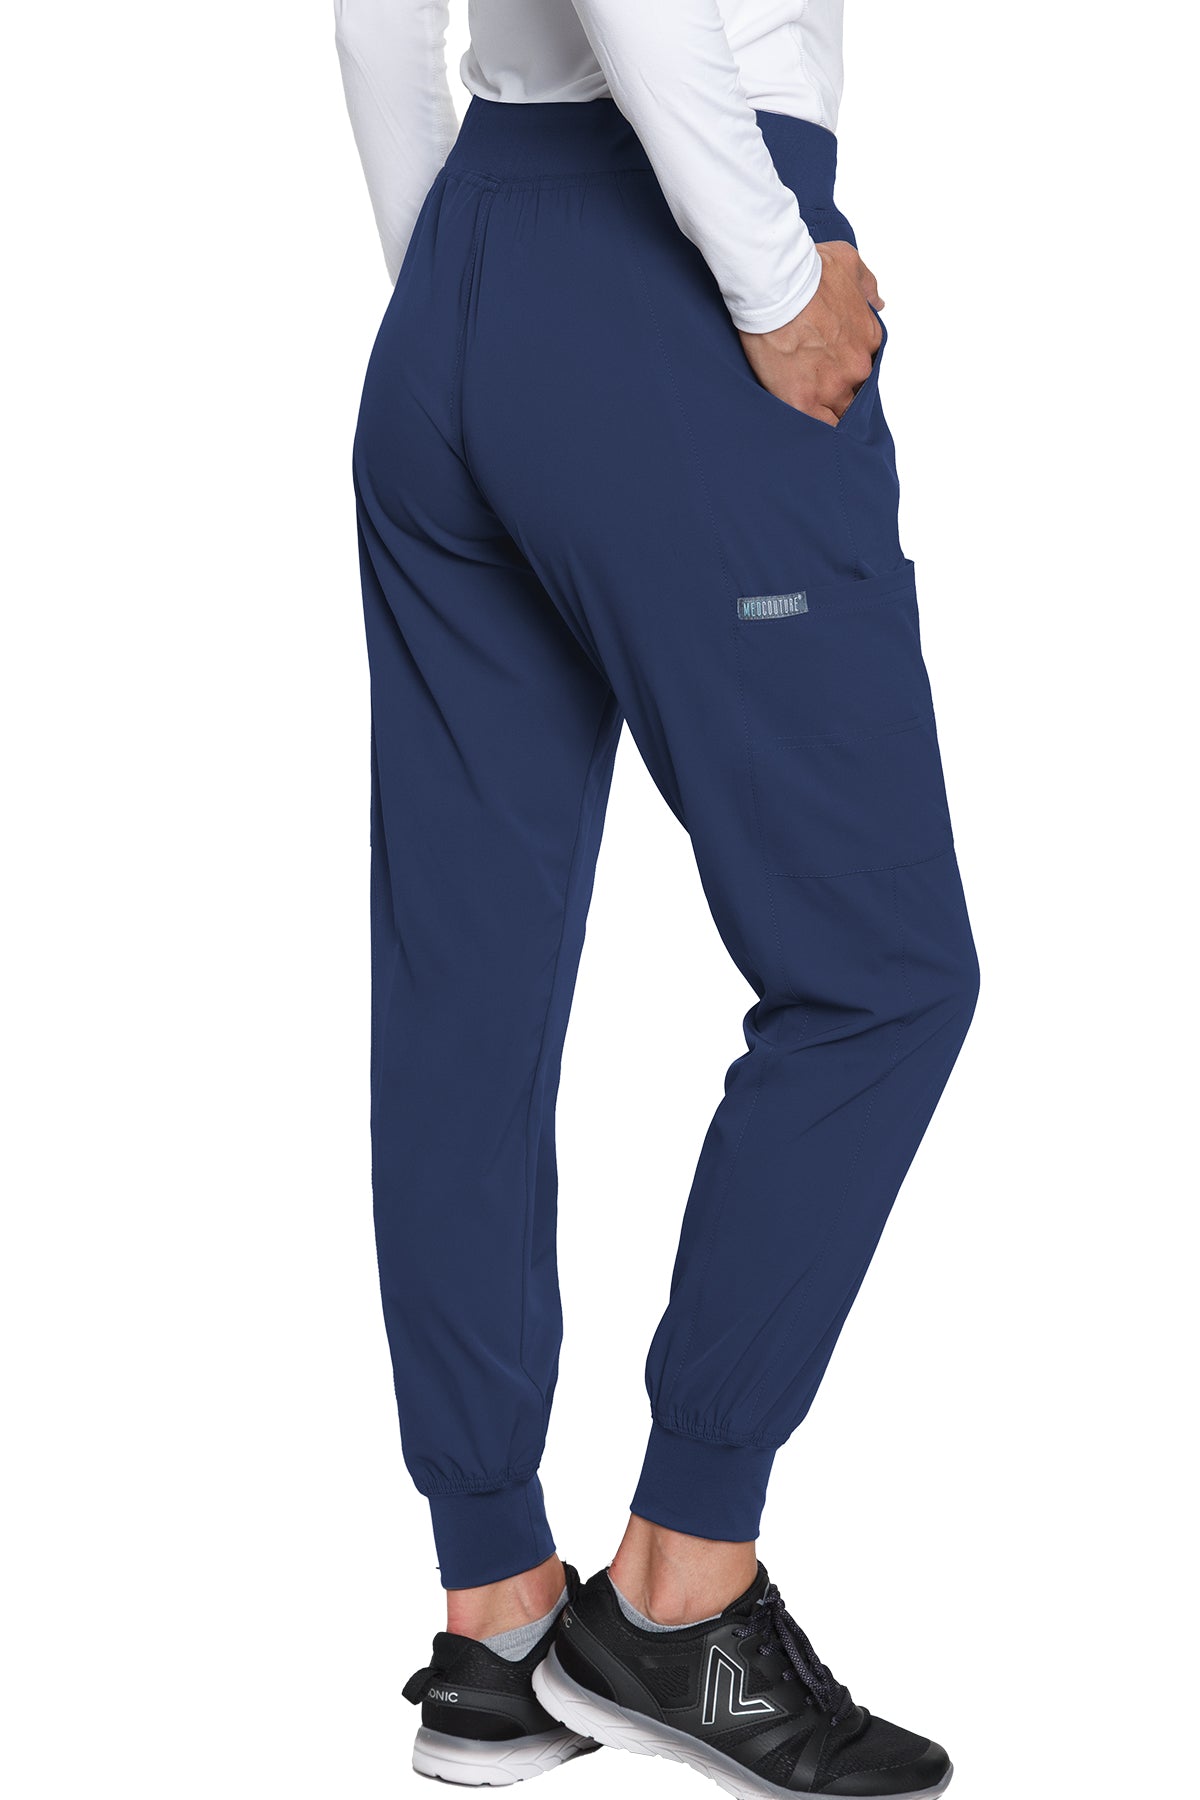 Med Couture Seamed Jogger  -Regular-XS-XL/ NAVY